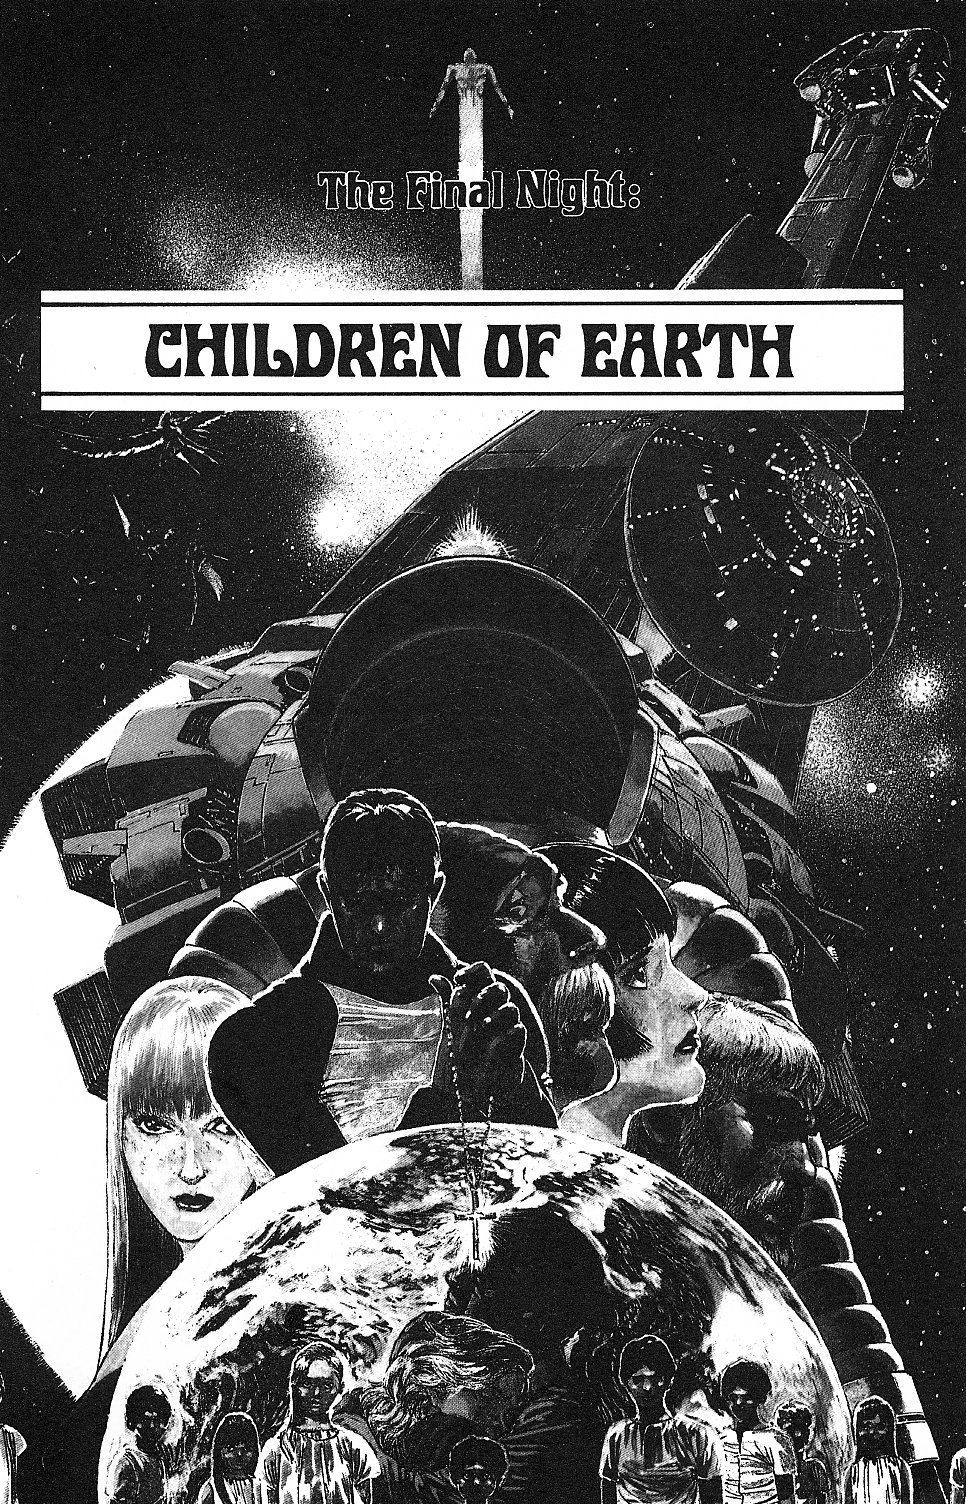 2001 Nights Vol. 3 Ch. 19 Children of the Earth